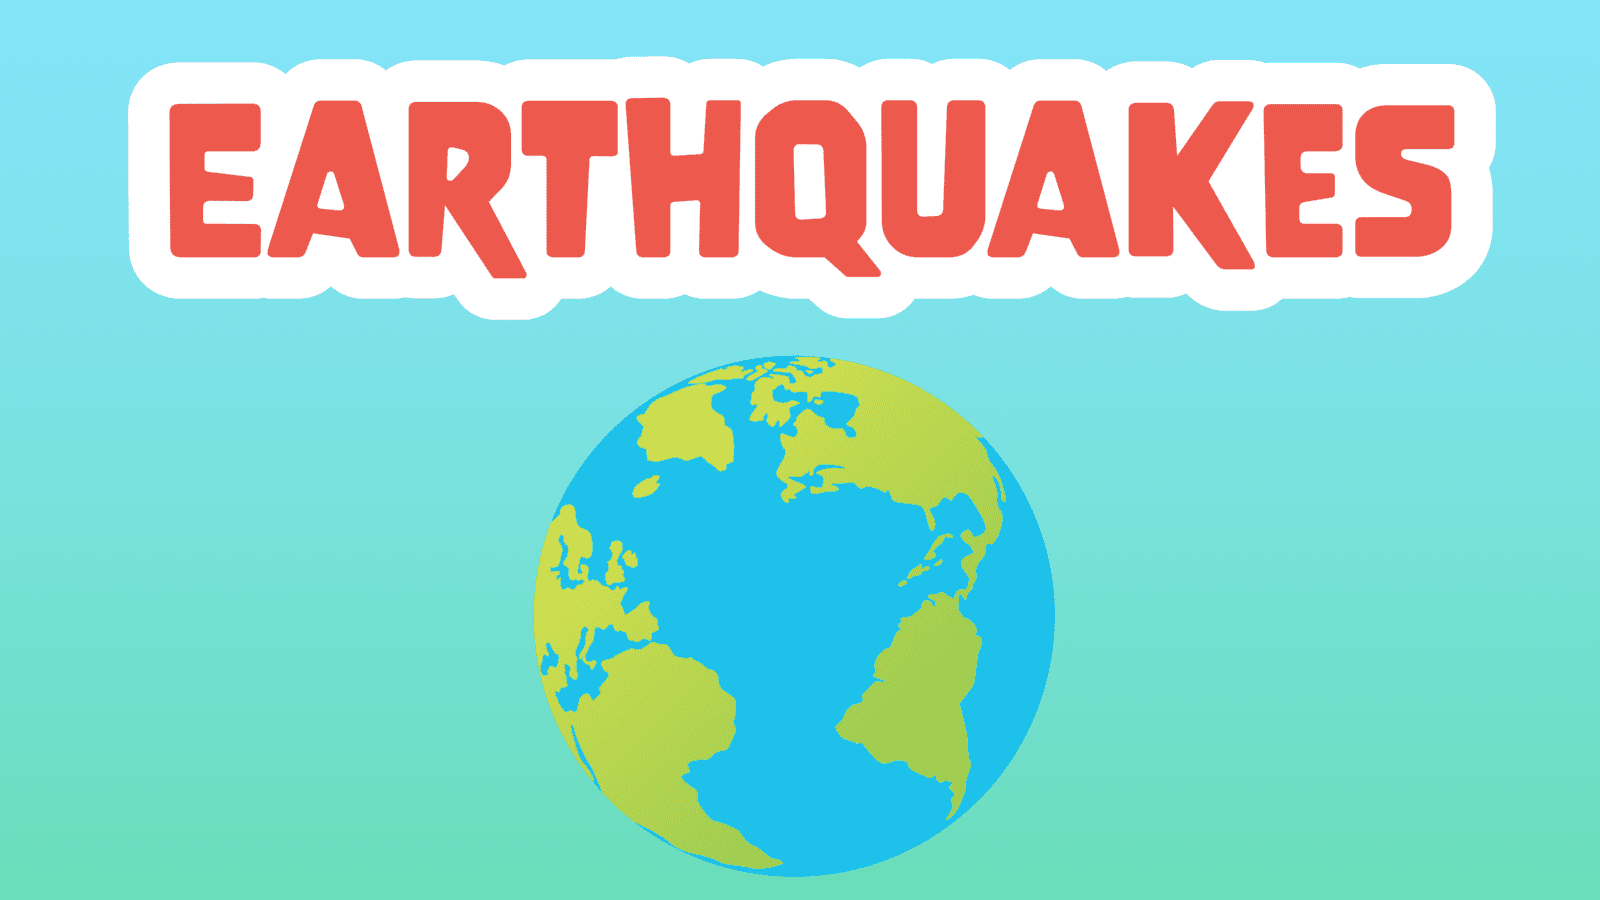 Earthquakes Facts for Kids – 5 Exciting Facts about Earthquakes